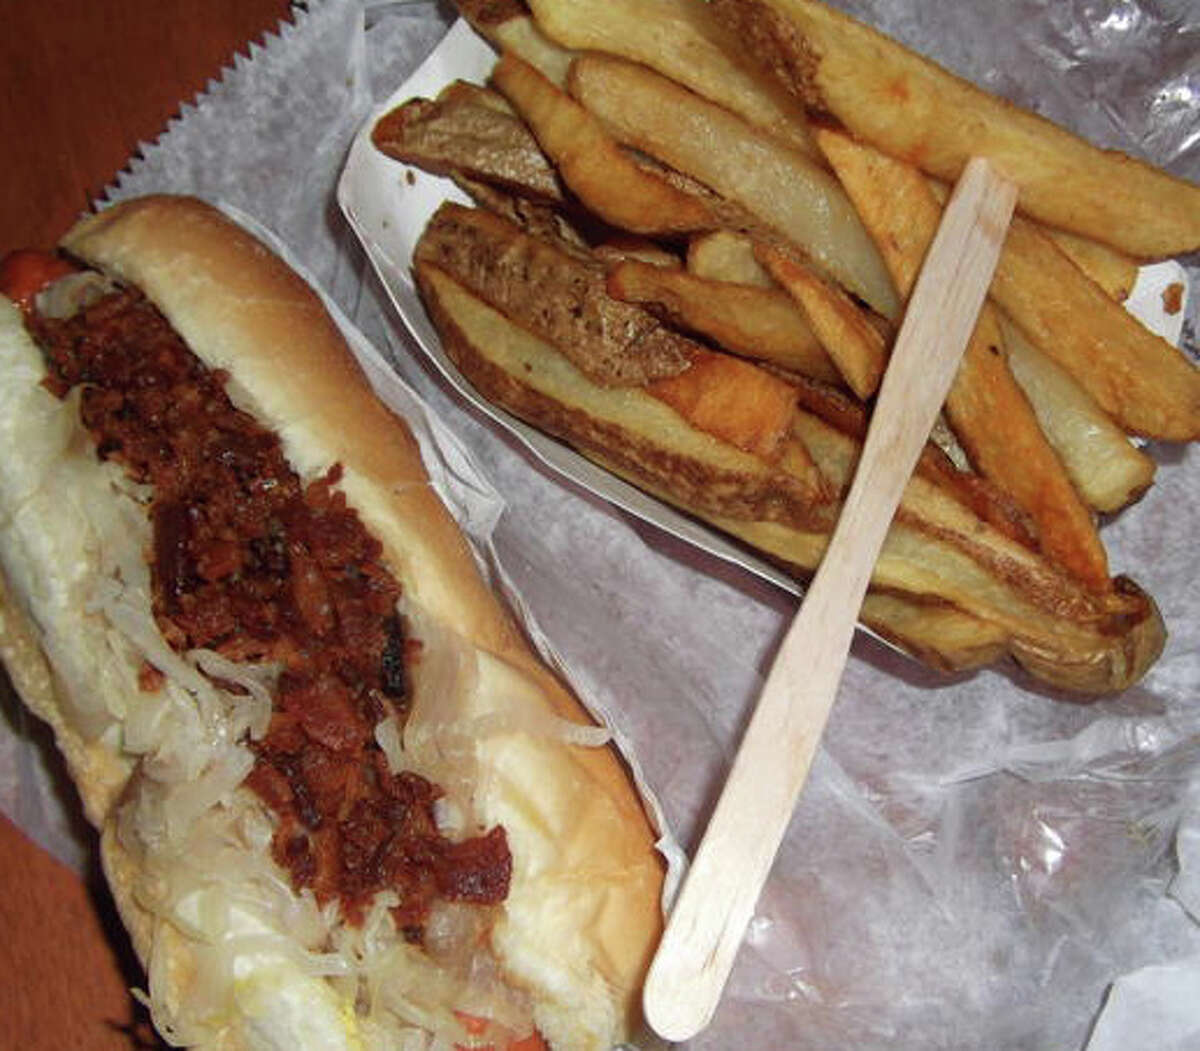 A Rawley's hot dog with fries, complete with a small wooden fork.